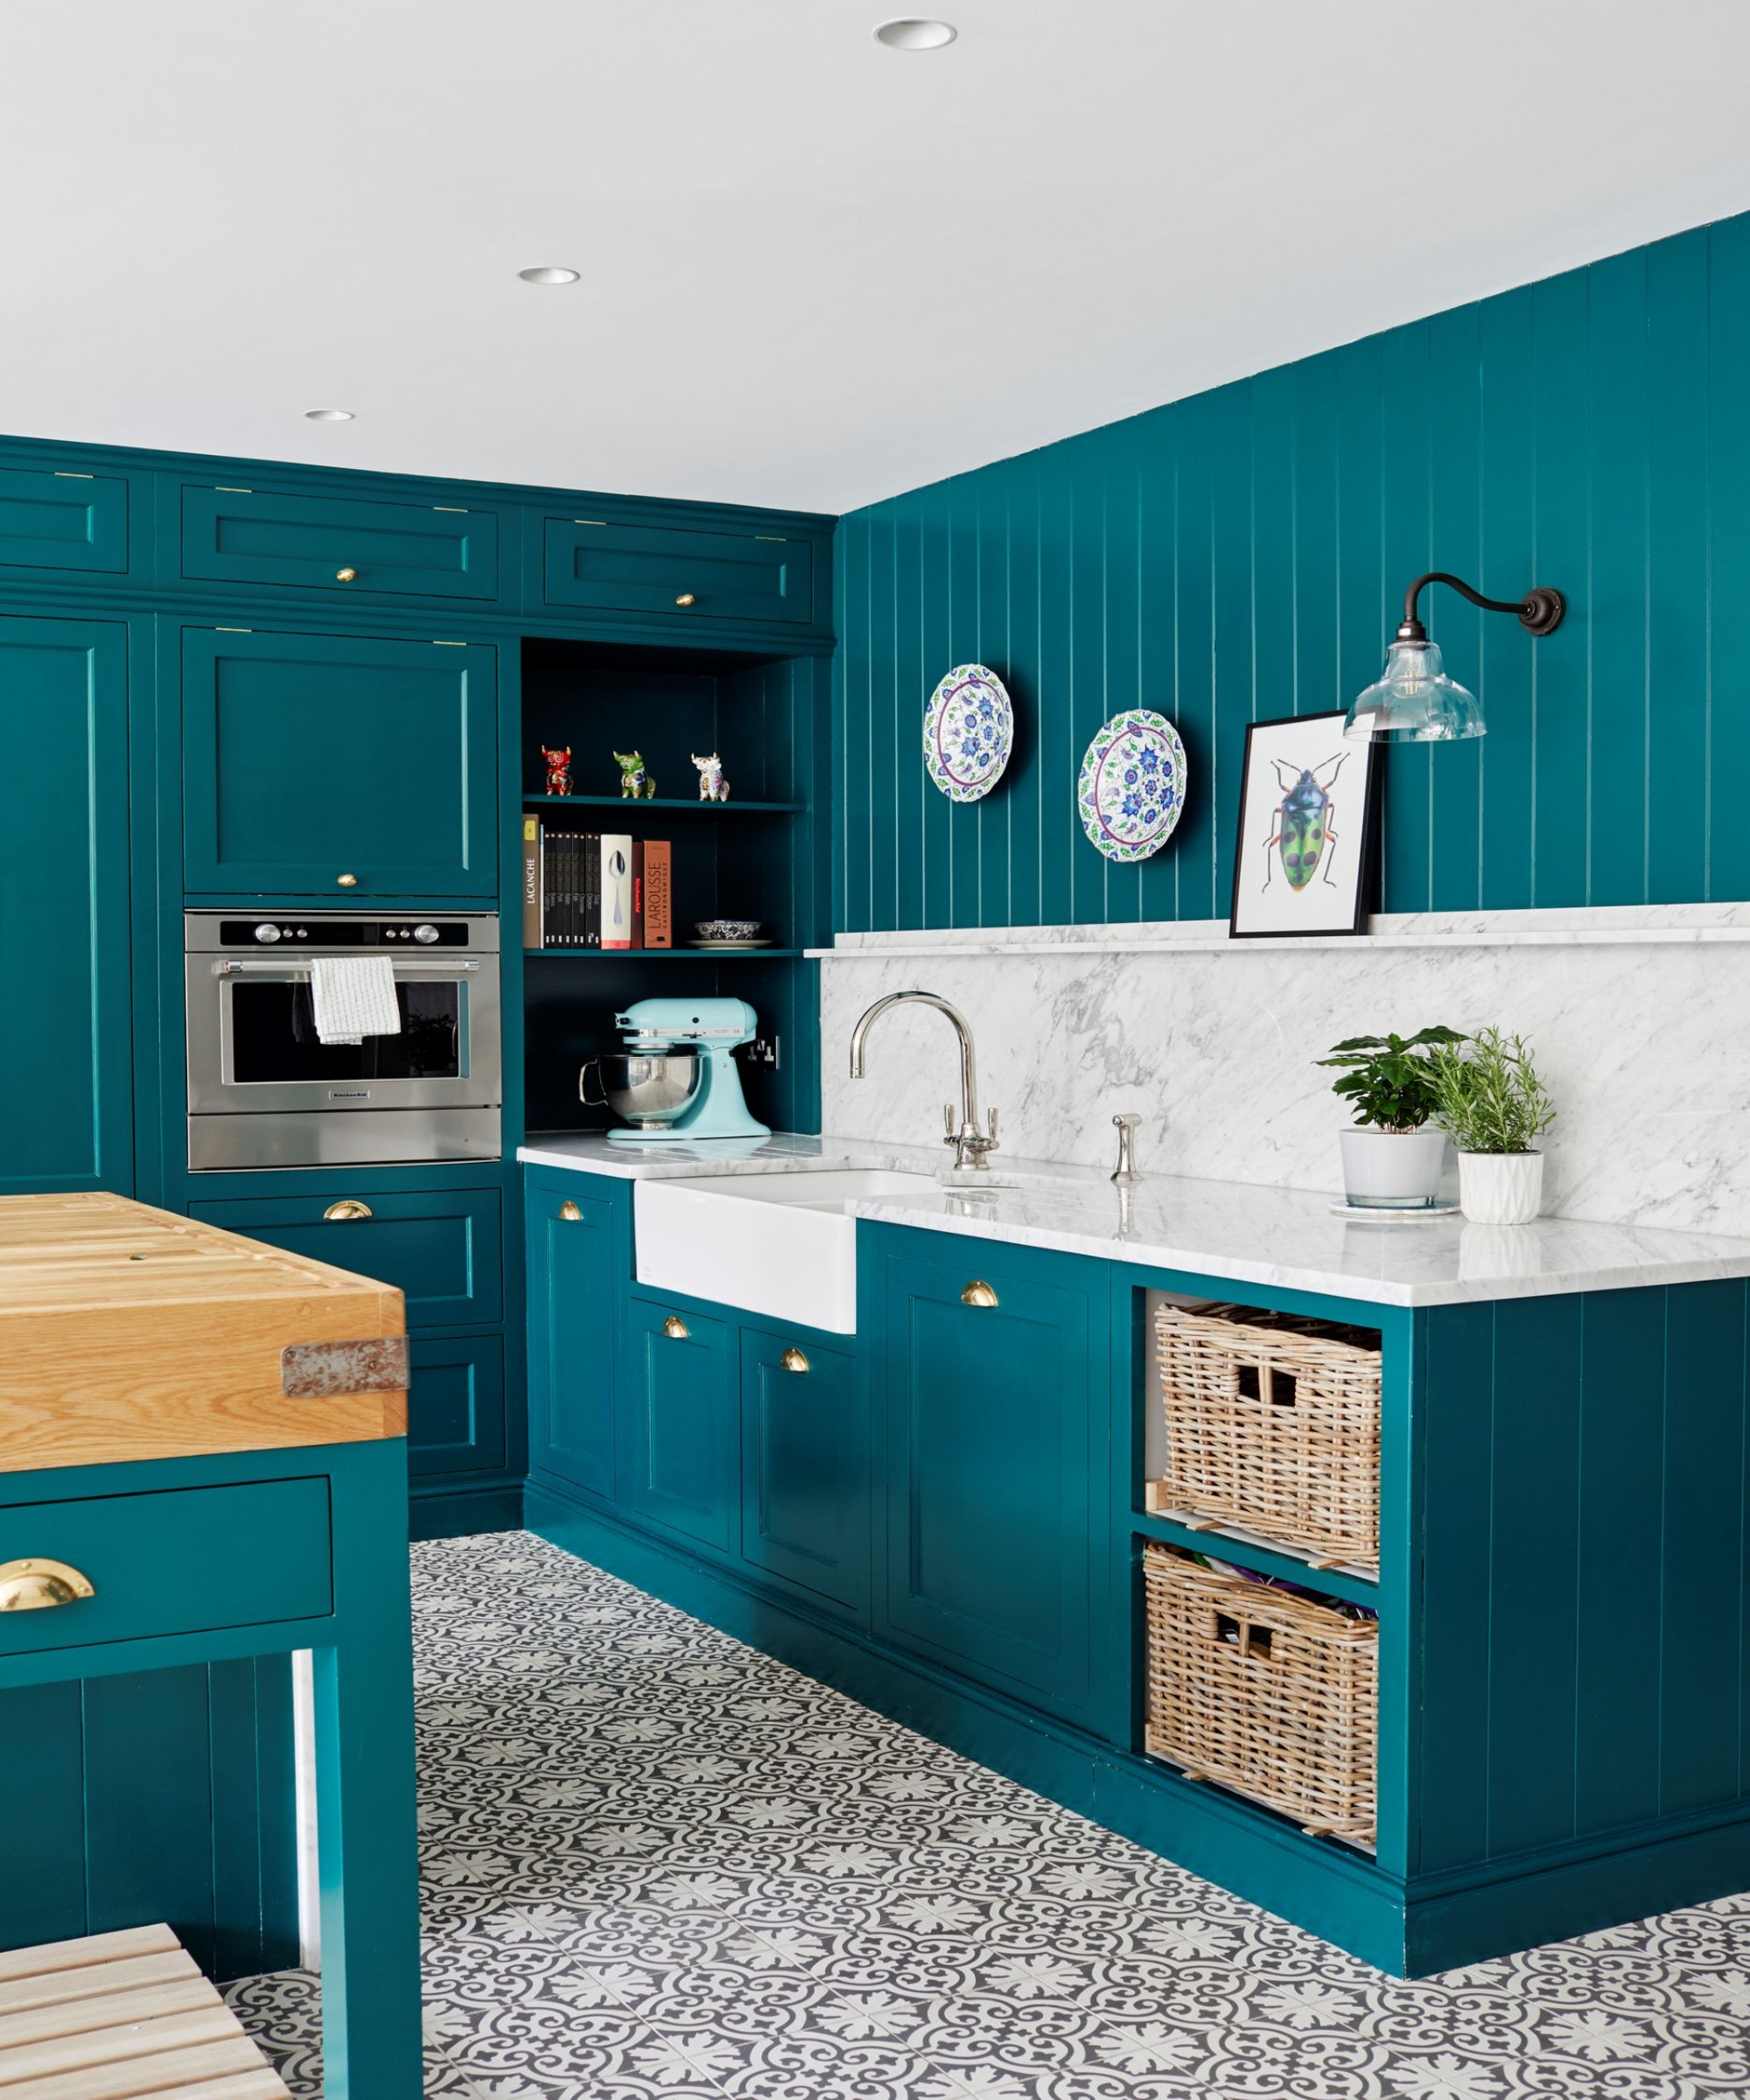 teal kitchen with teal painted walls and cupboards, marble countertop